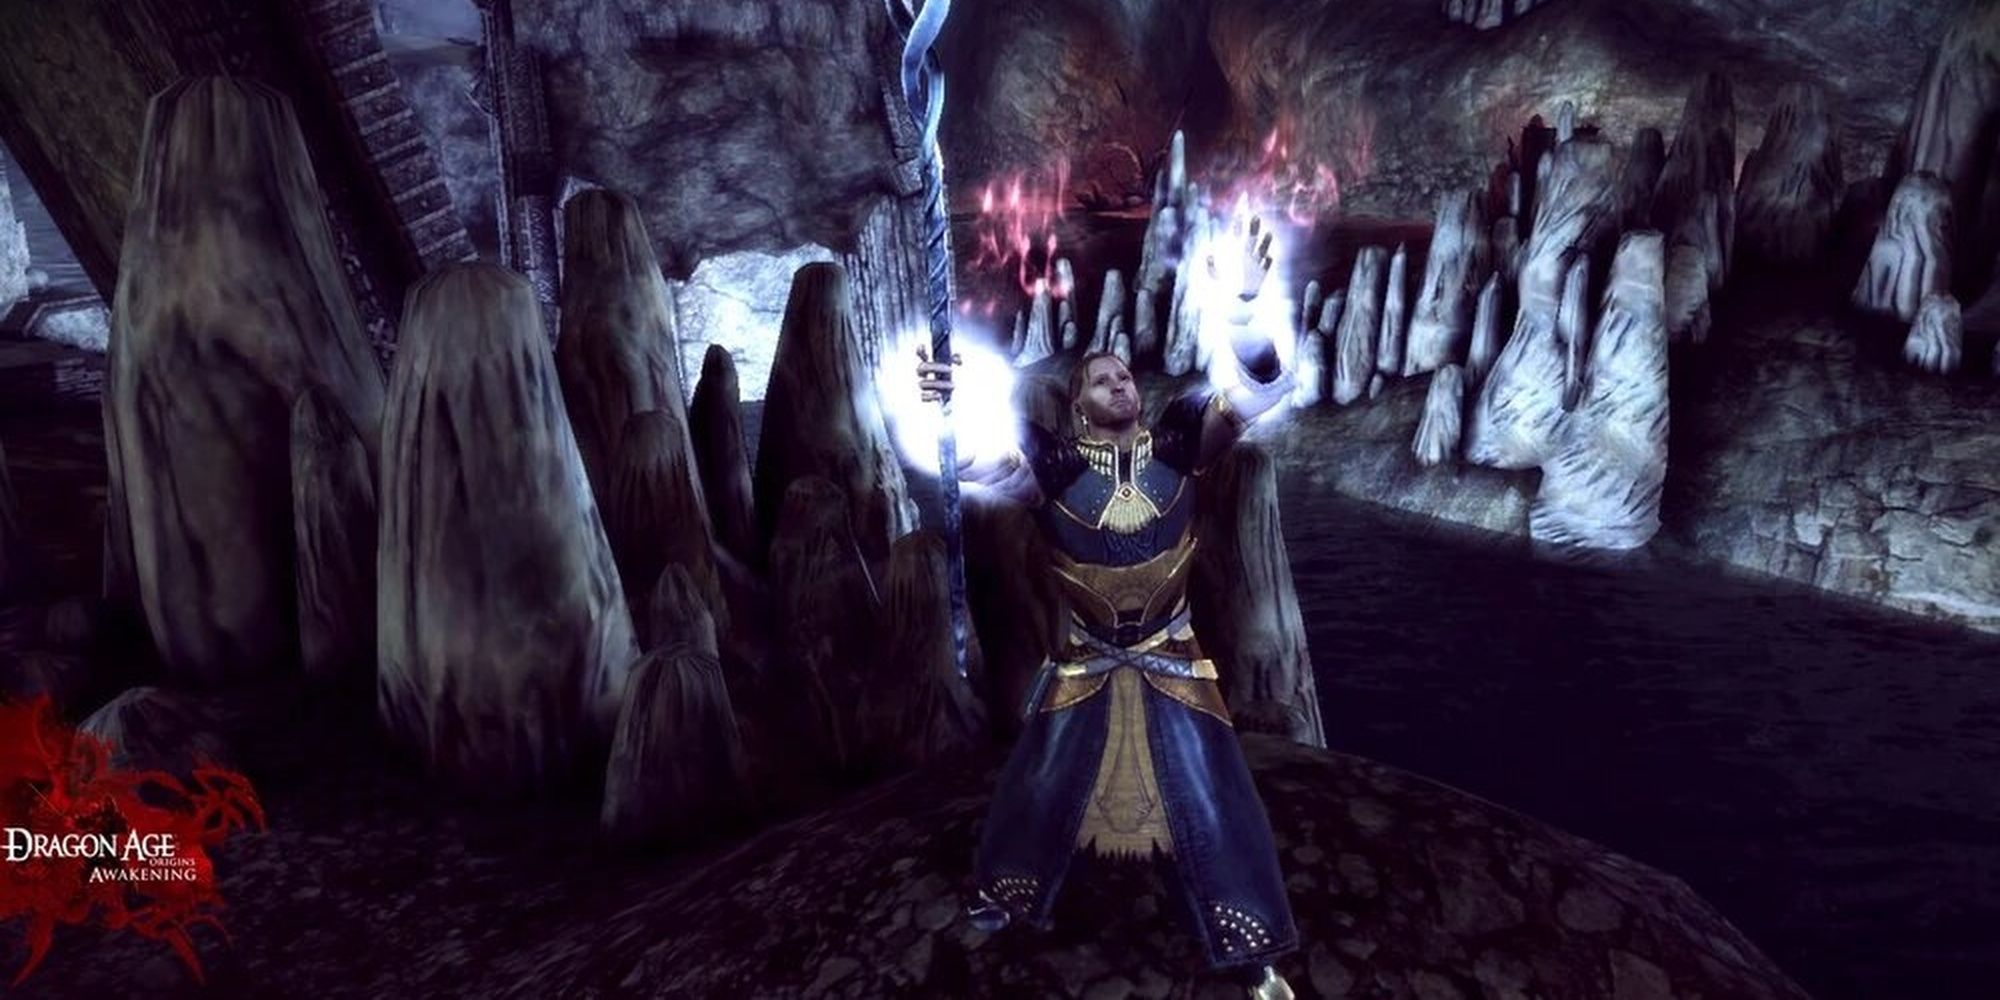 Anders performs magic in a cave in the Dragon Age: Origins - Awakening expansion